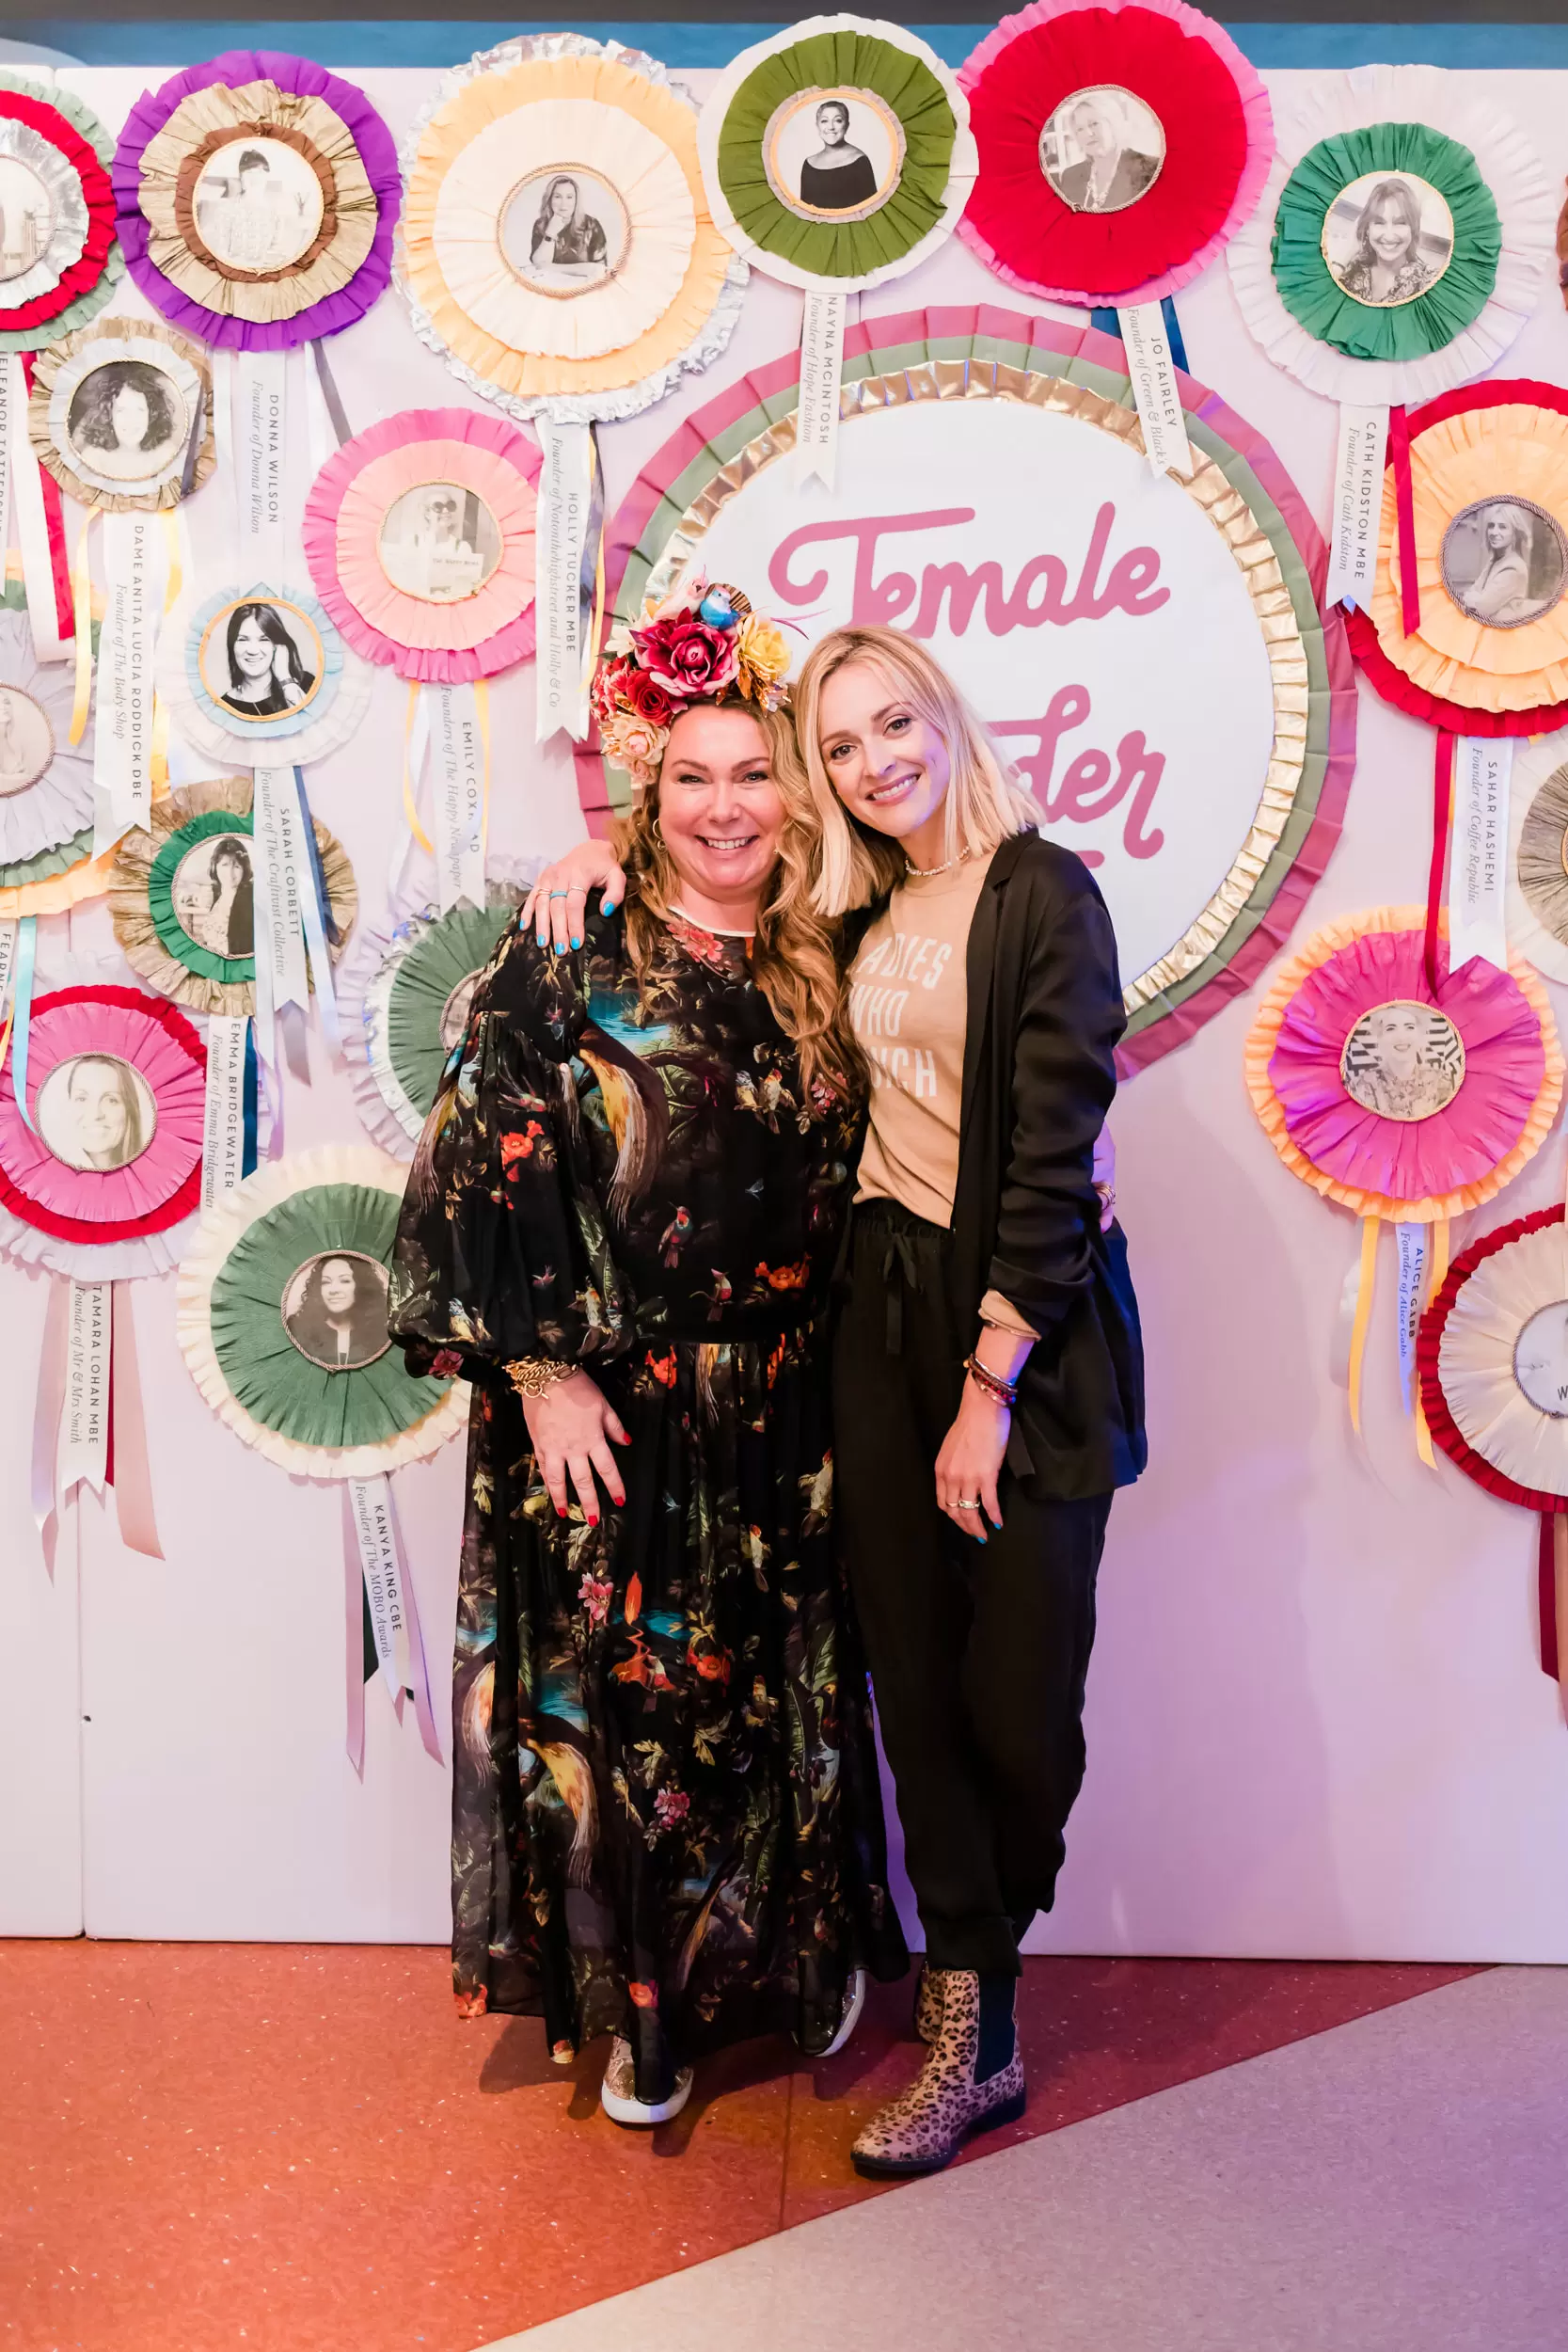 Holly Tucker MBE and Fearne Cotton stood in front of Female Founder rosette wall